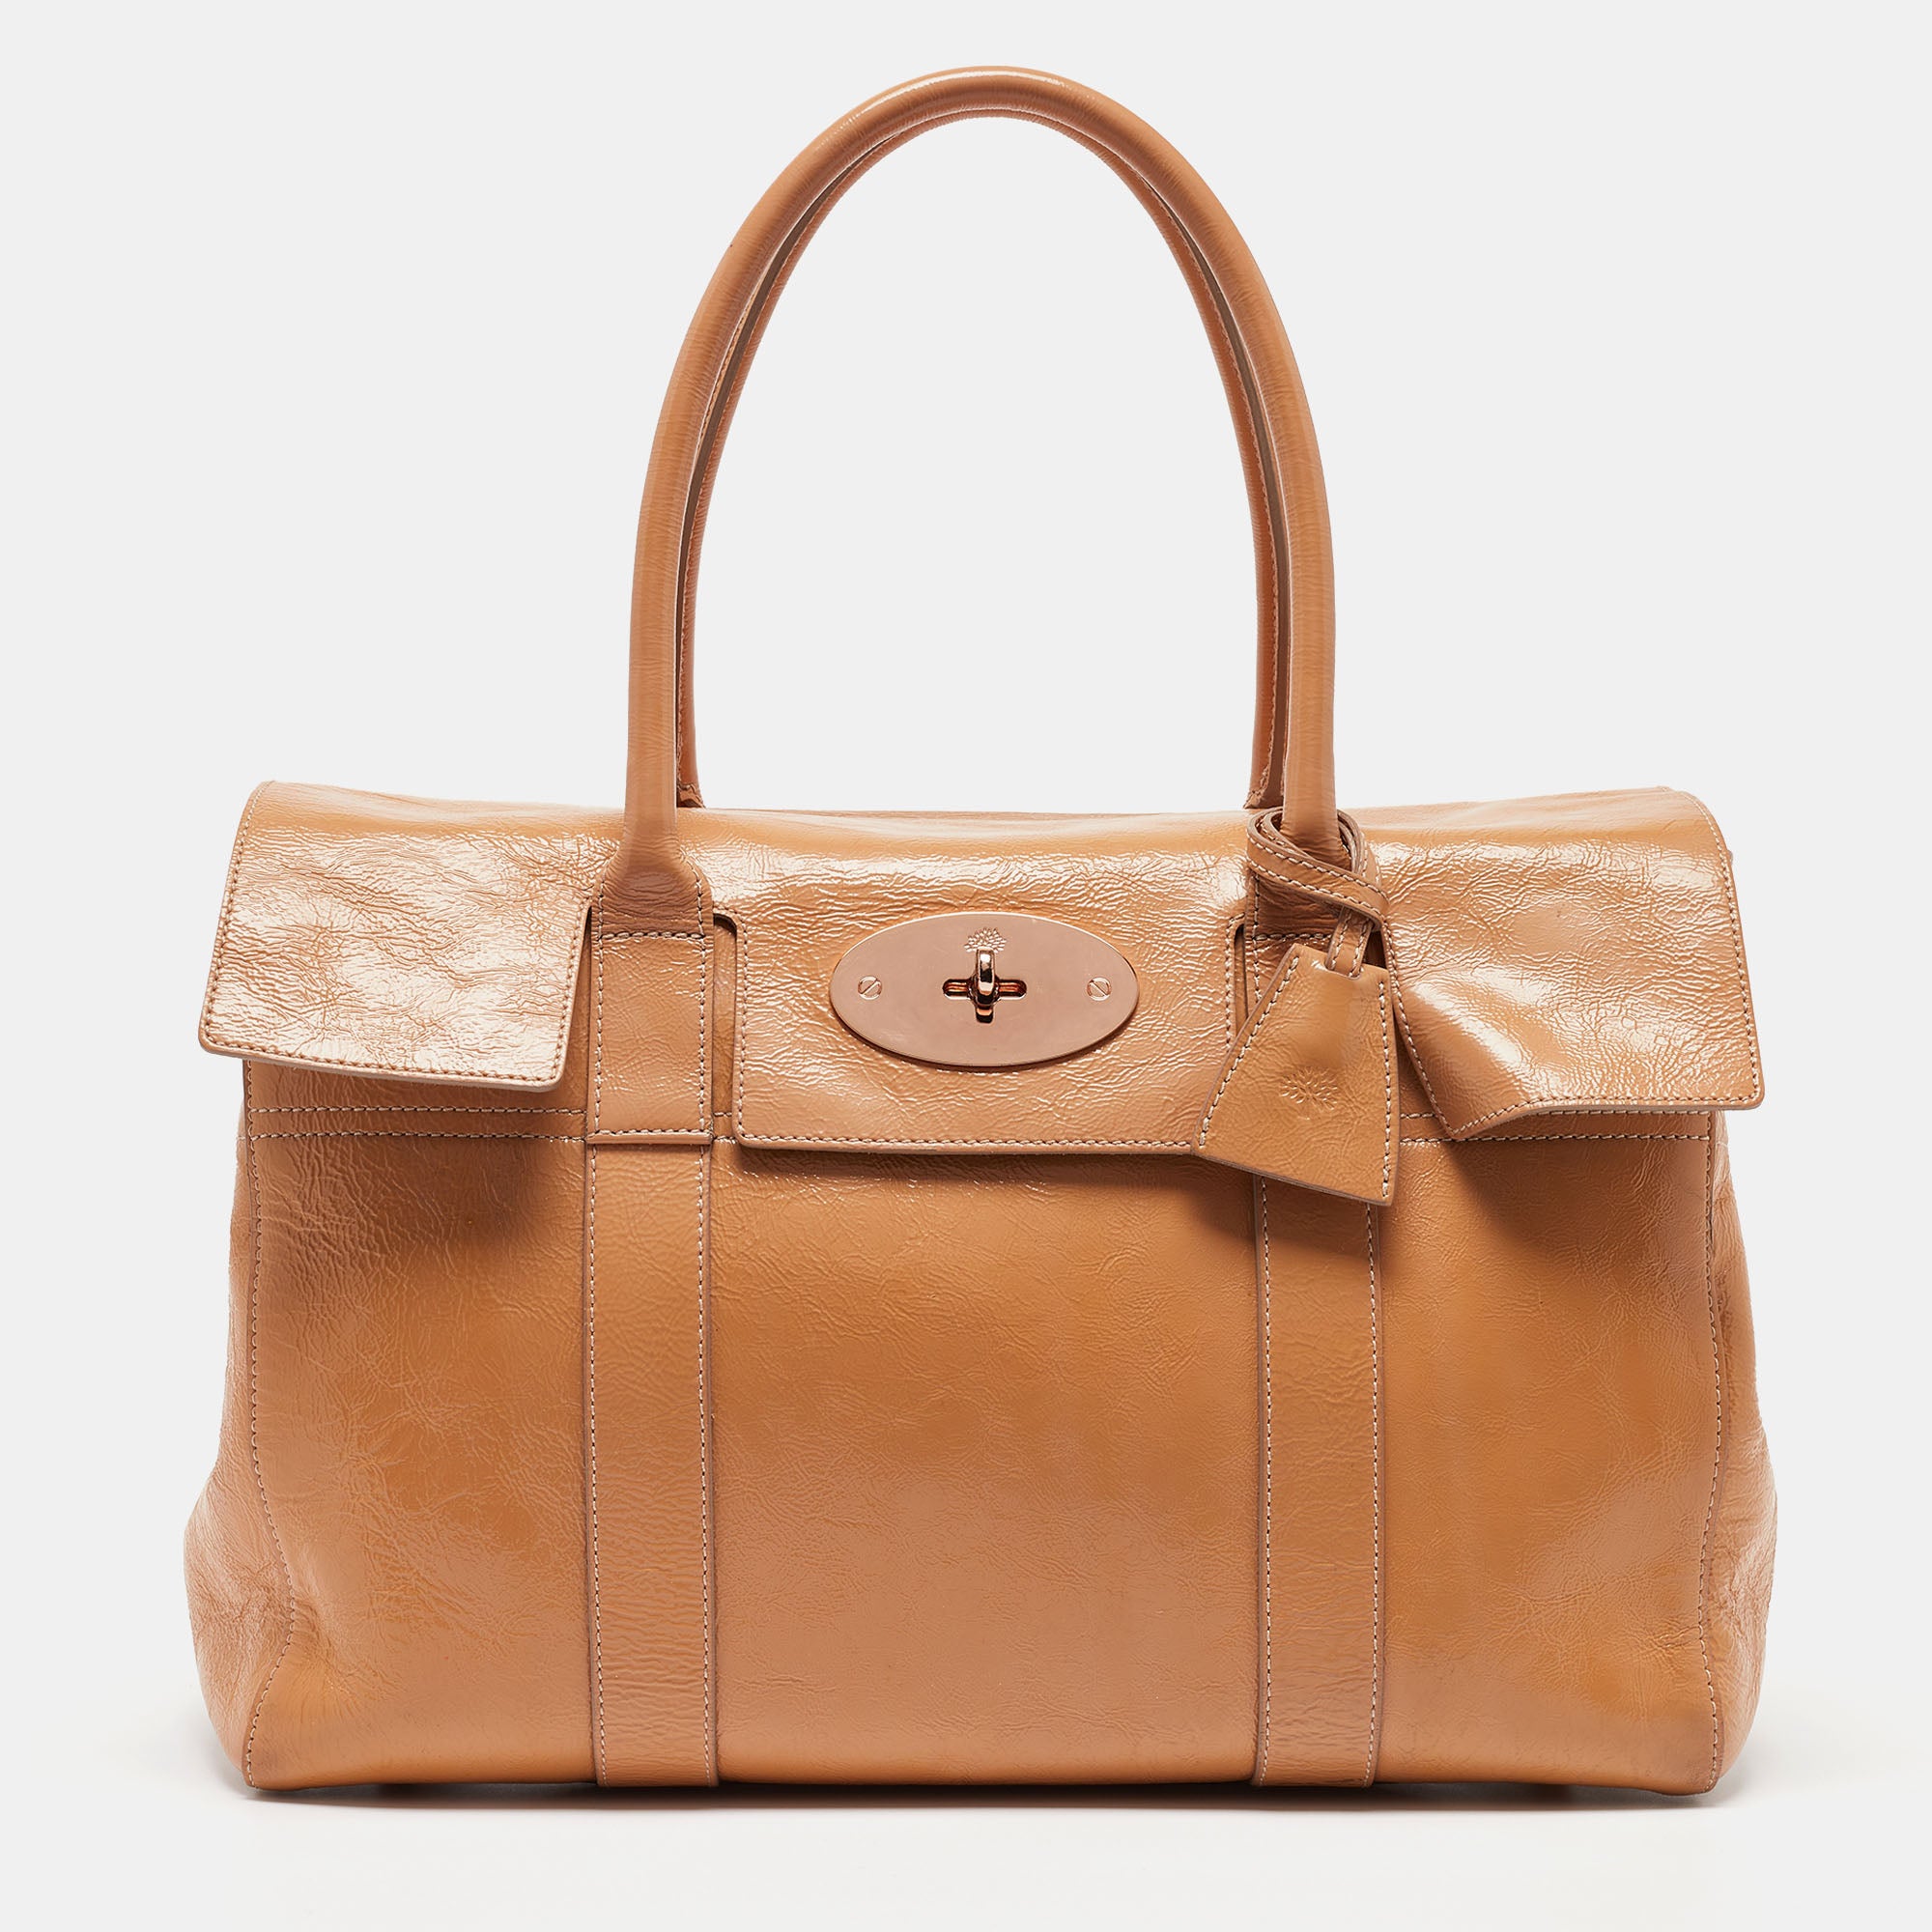 Mulberry Patent Leather Bayswater Satchel In Beige